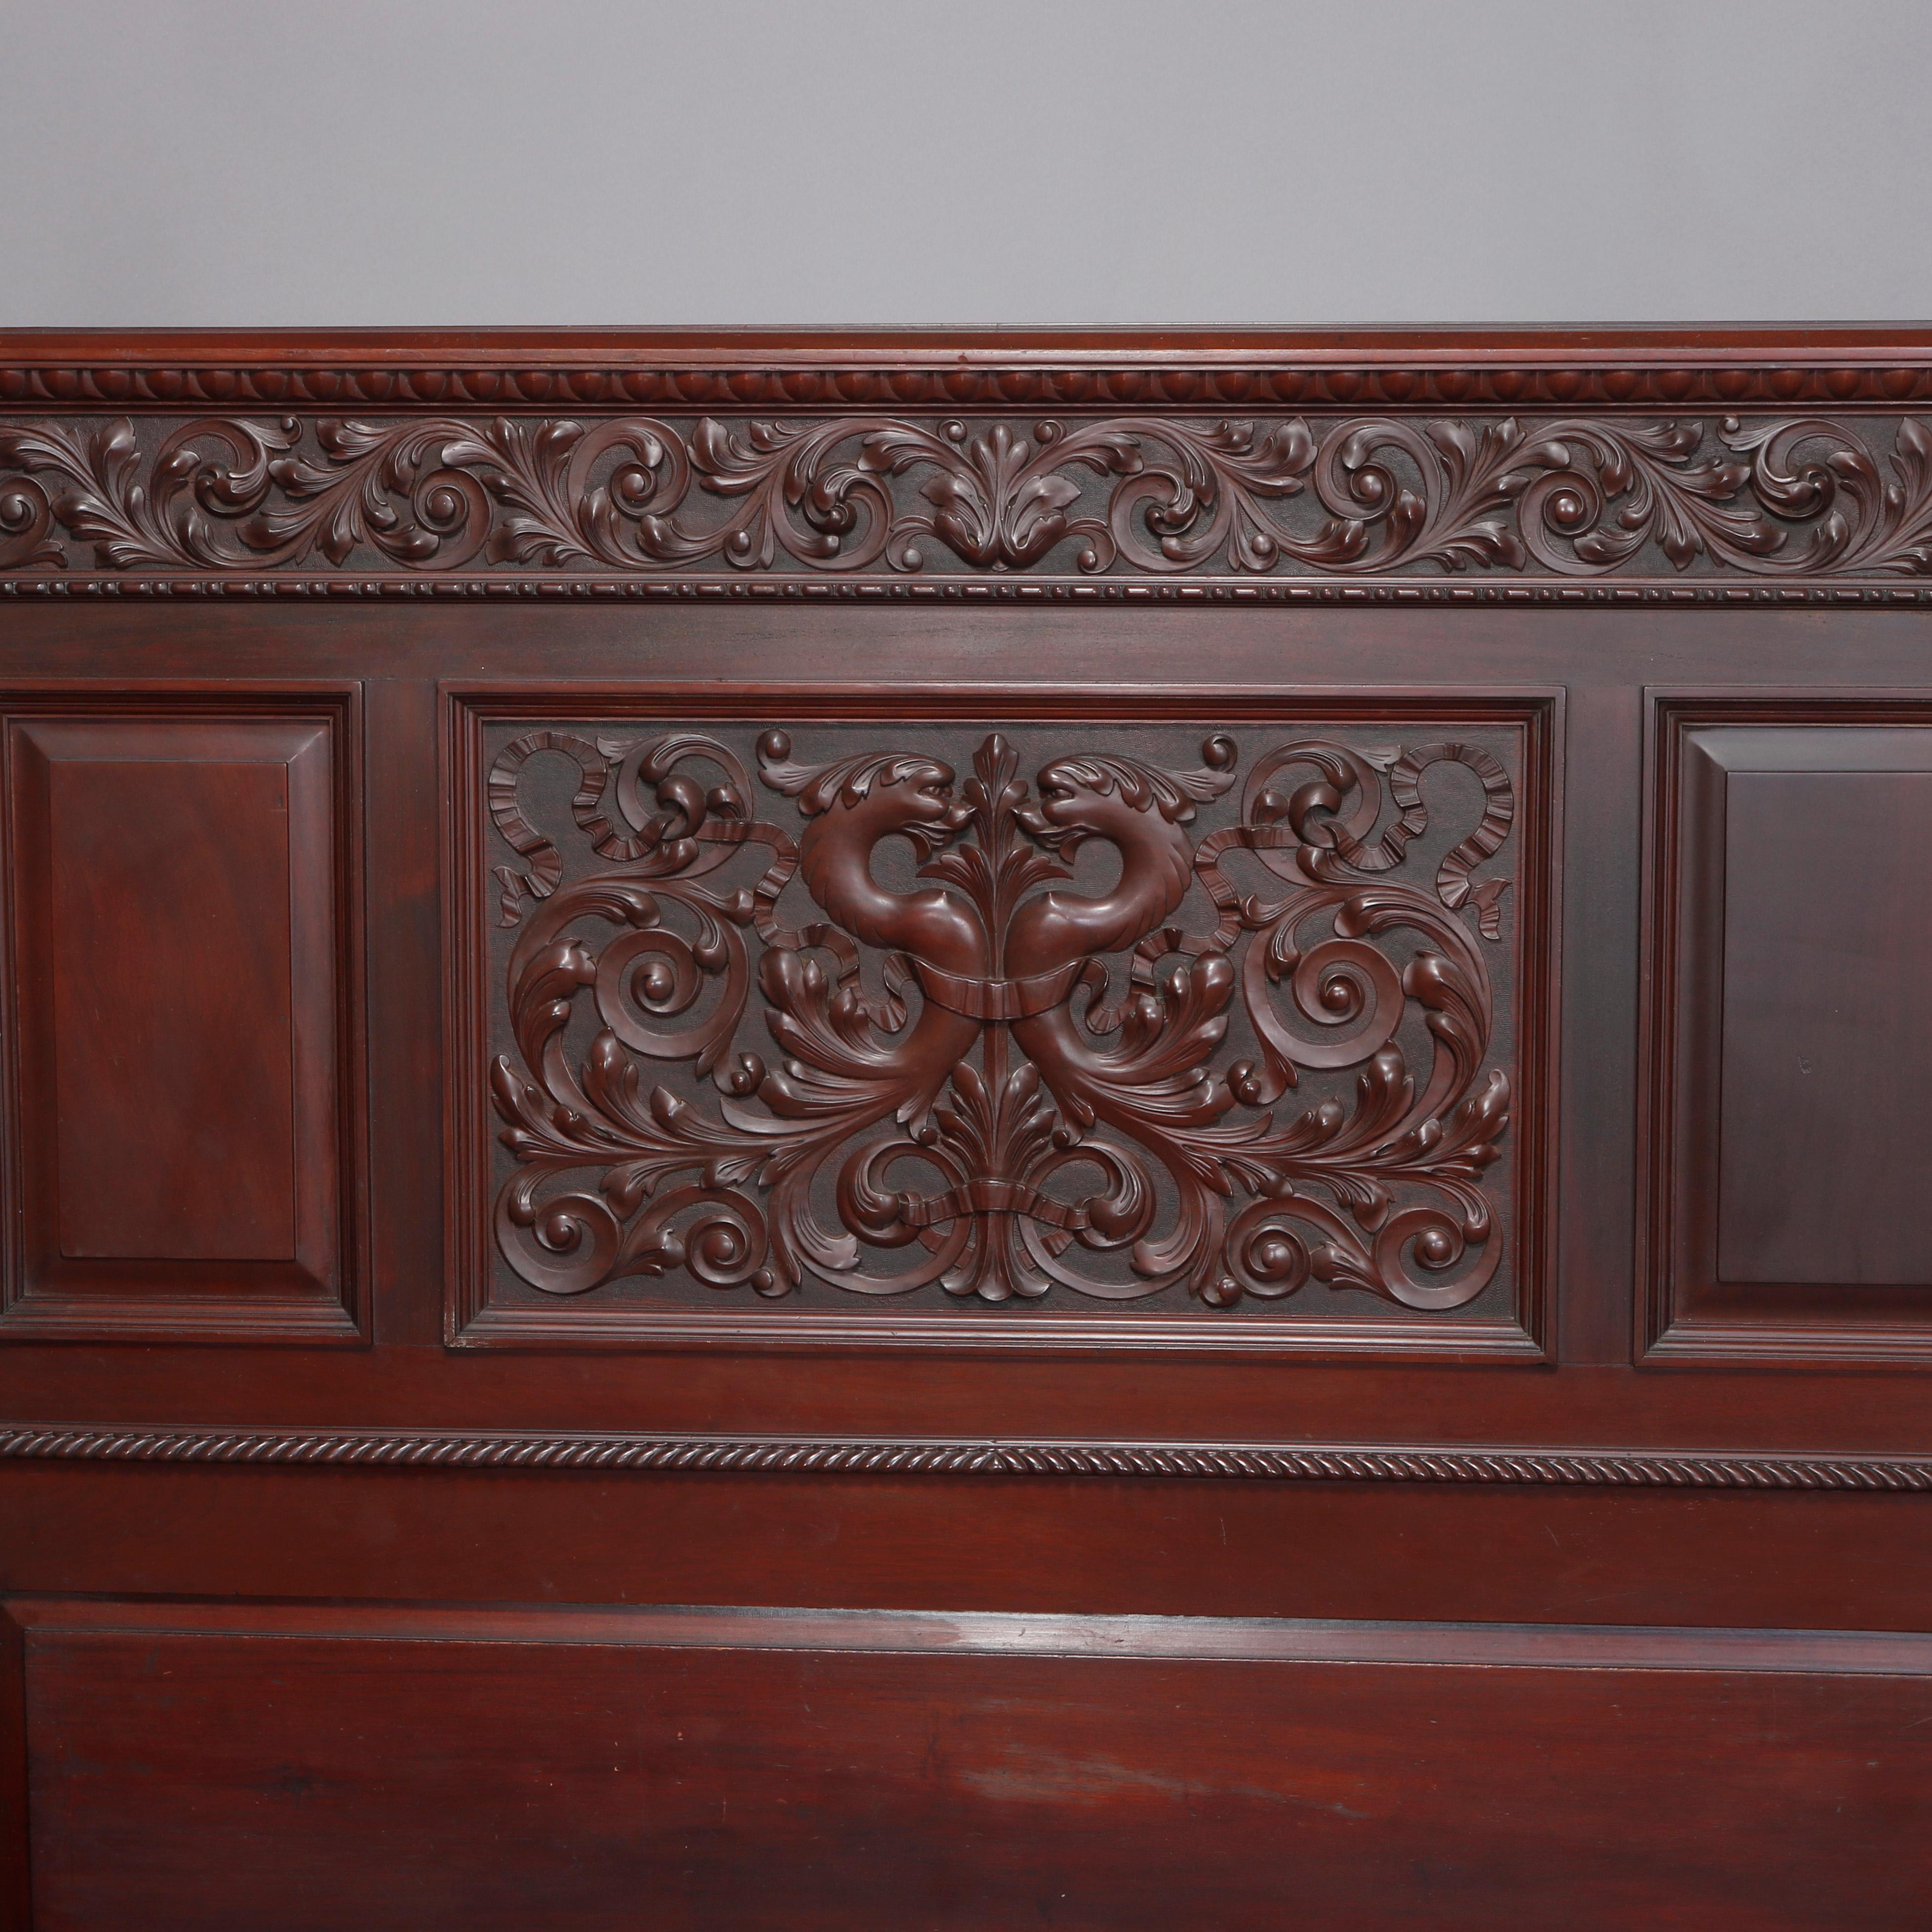 An antique mahogany full/double bed frame attributed to R.J. Horner offers mahogany construction with paneled head board having intricately carved central facing griffins flanked on scroll, ribbon and foliate ground with flanking reeded columns and